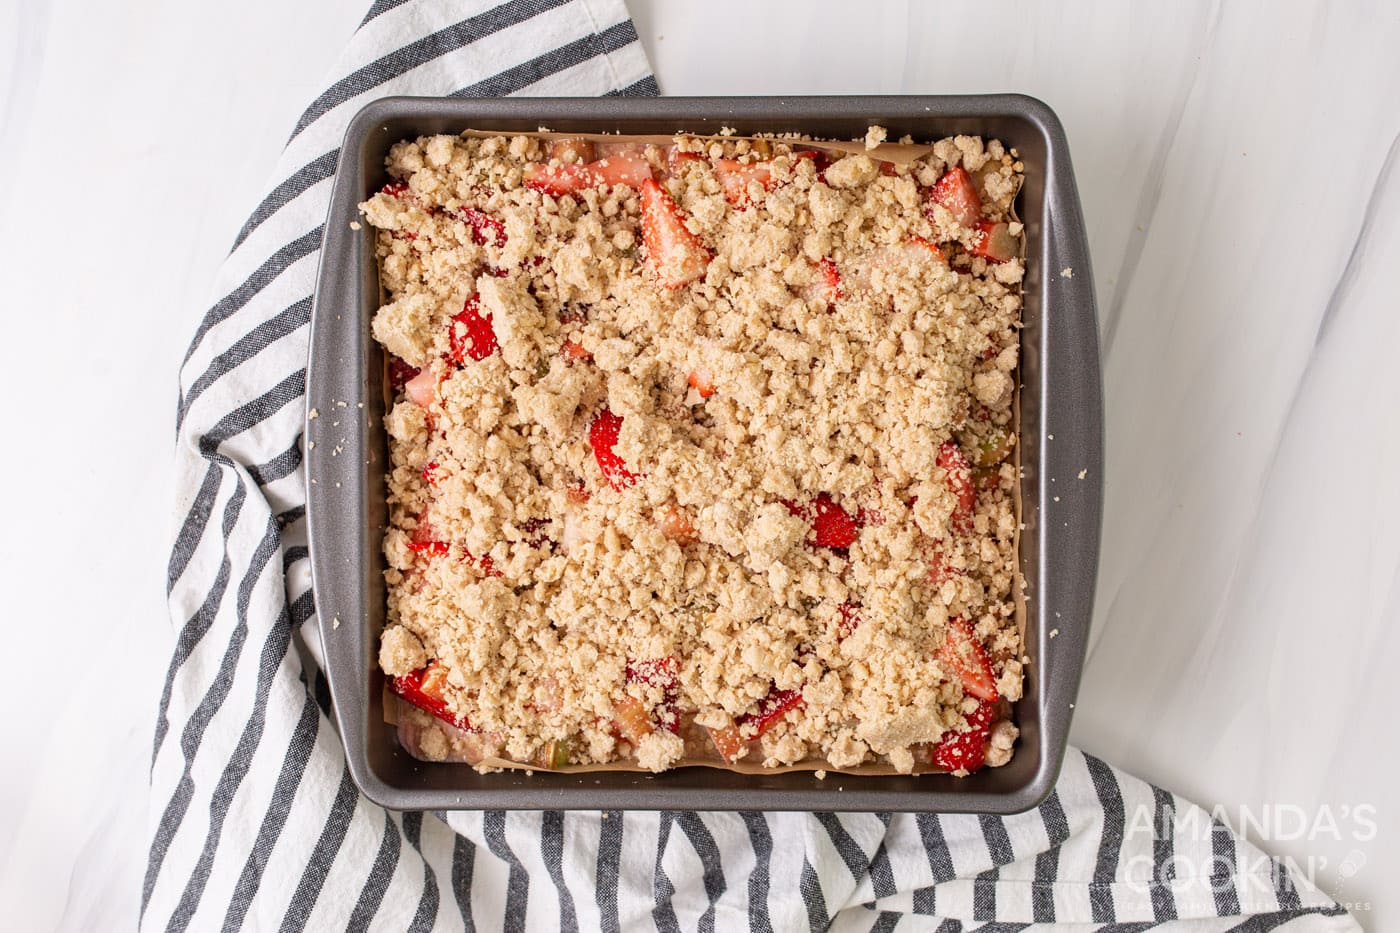 crumble topping over strawberry rhubarb crumble bars in a pan